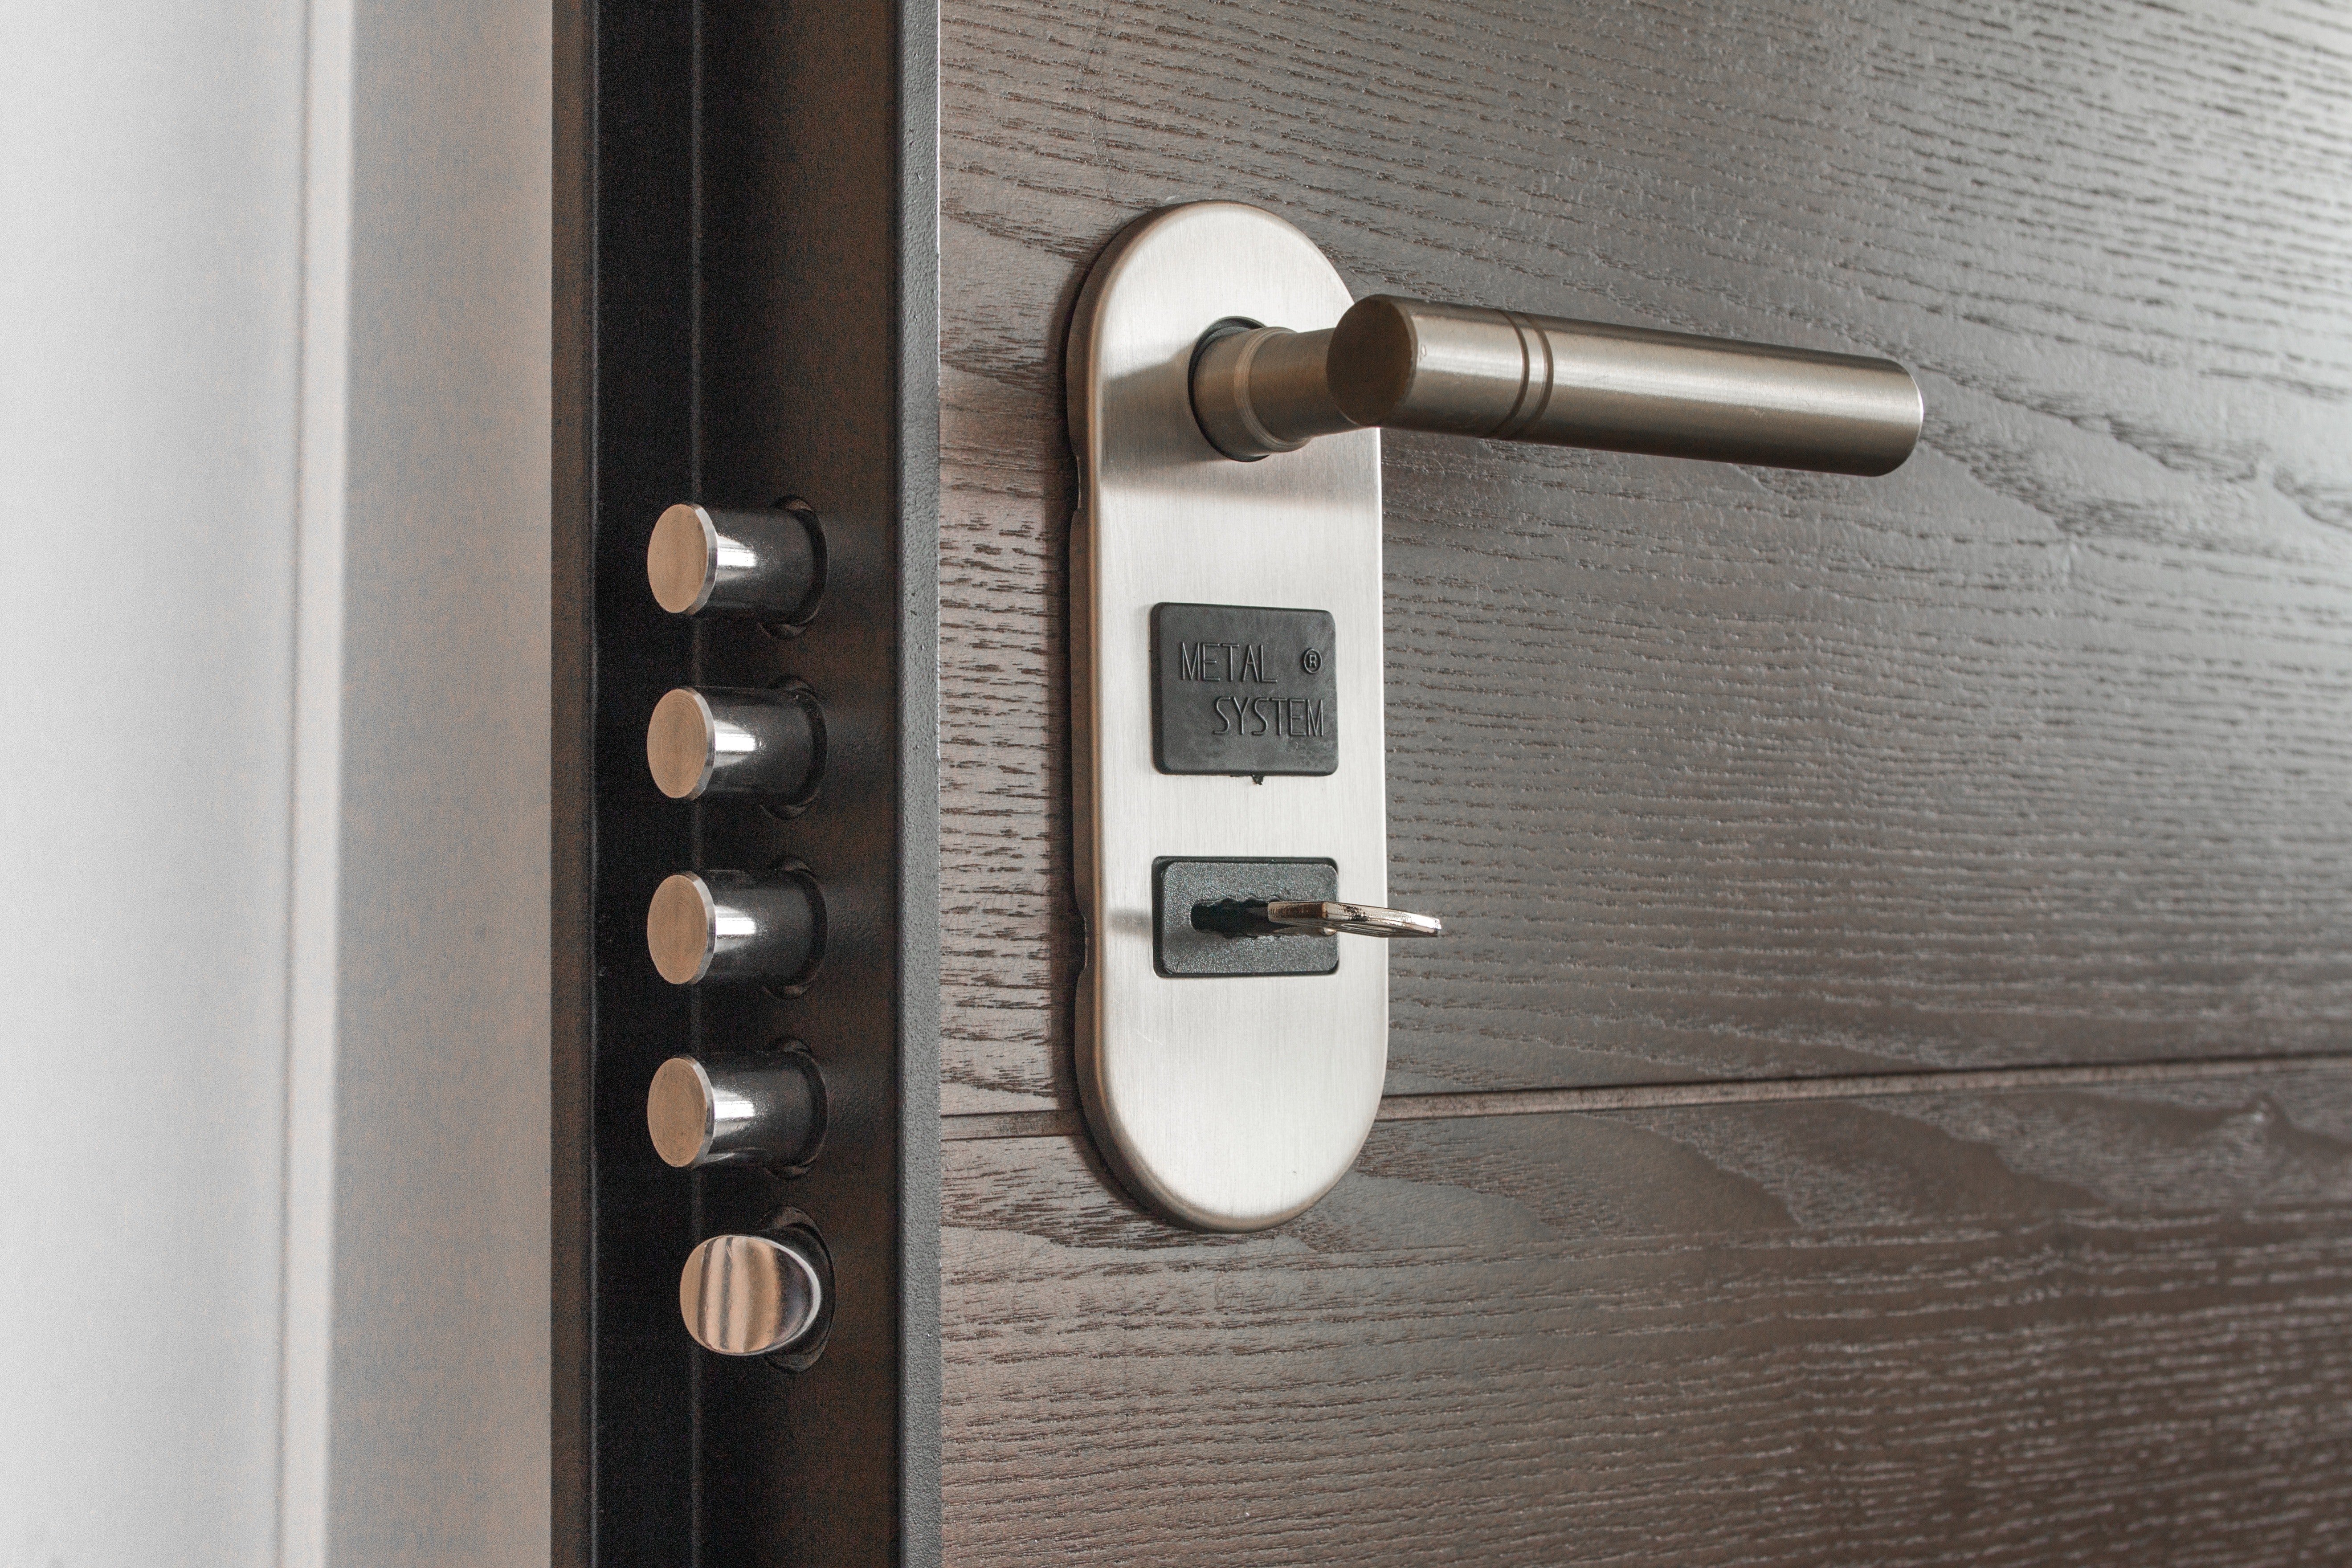 People advised OP to secure the door with upgraded locks & security systems | Photo: Pexels